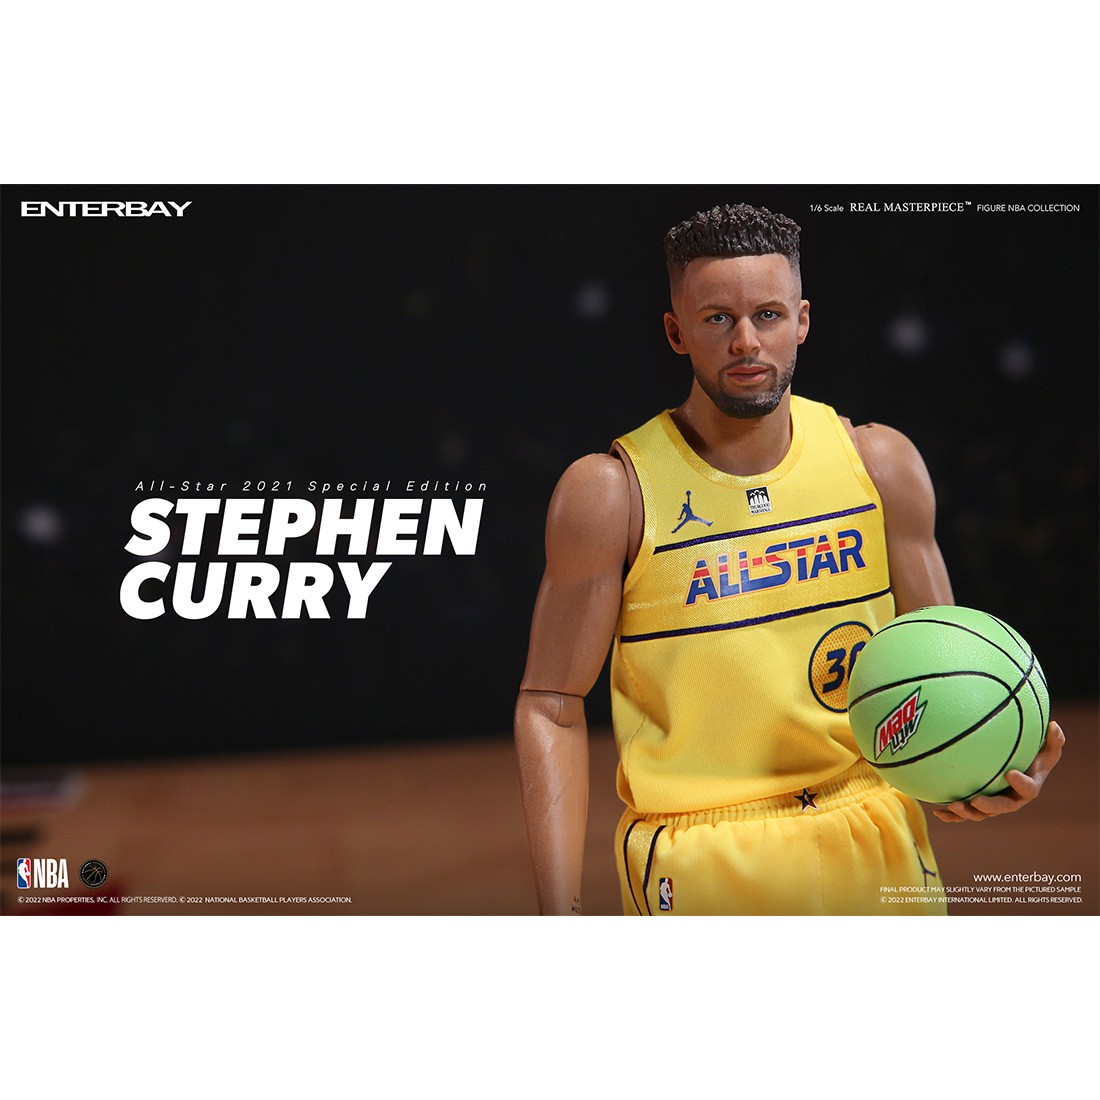 NBA x Enterbay Golden State Warriors Stephen Curry All-Star 2021 